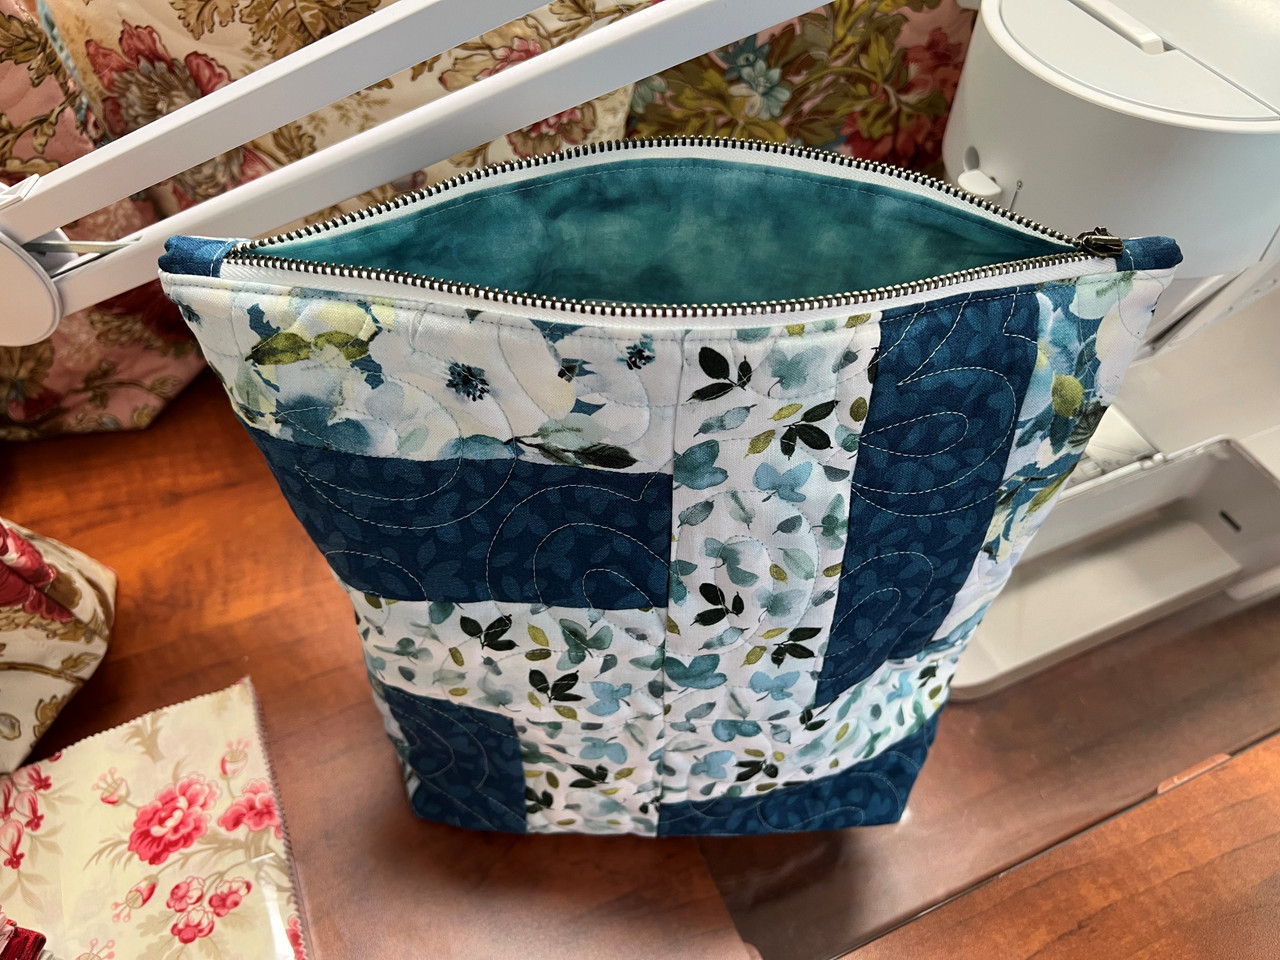  Quilted  Bag -Blue & Teal Floral/Leaf Pieced - Approximate Size 11" X 11"